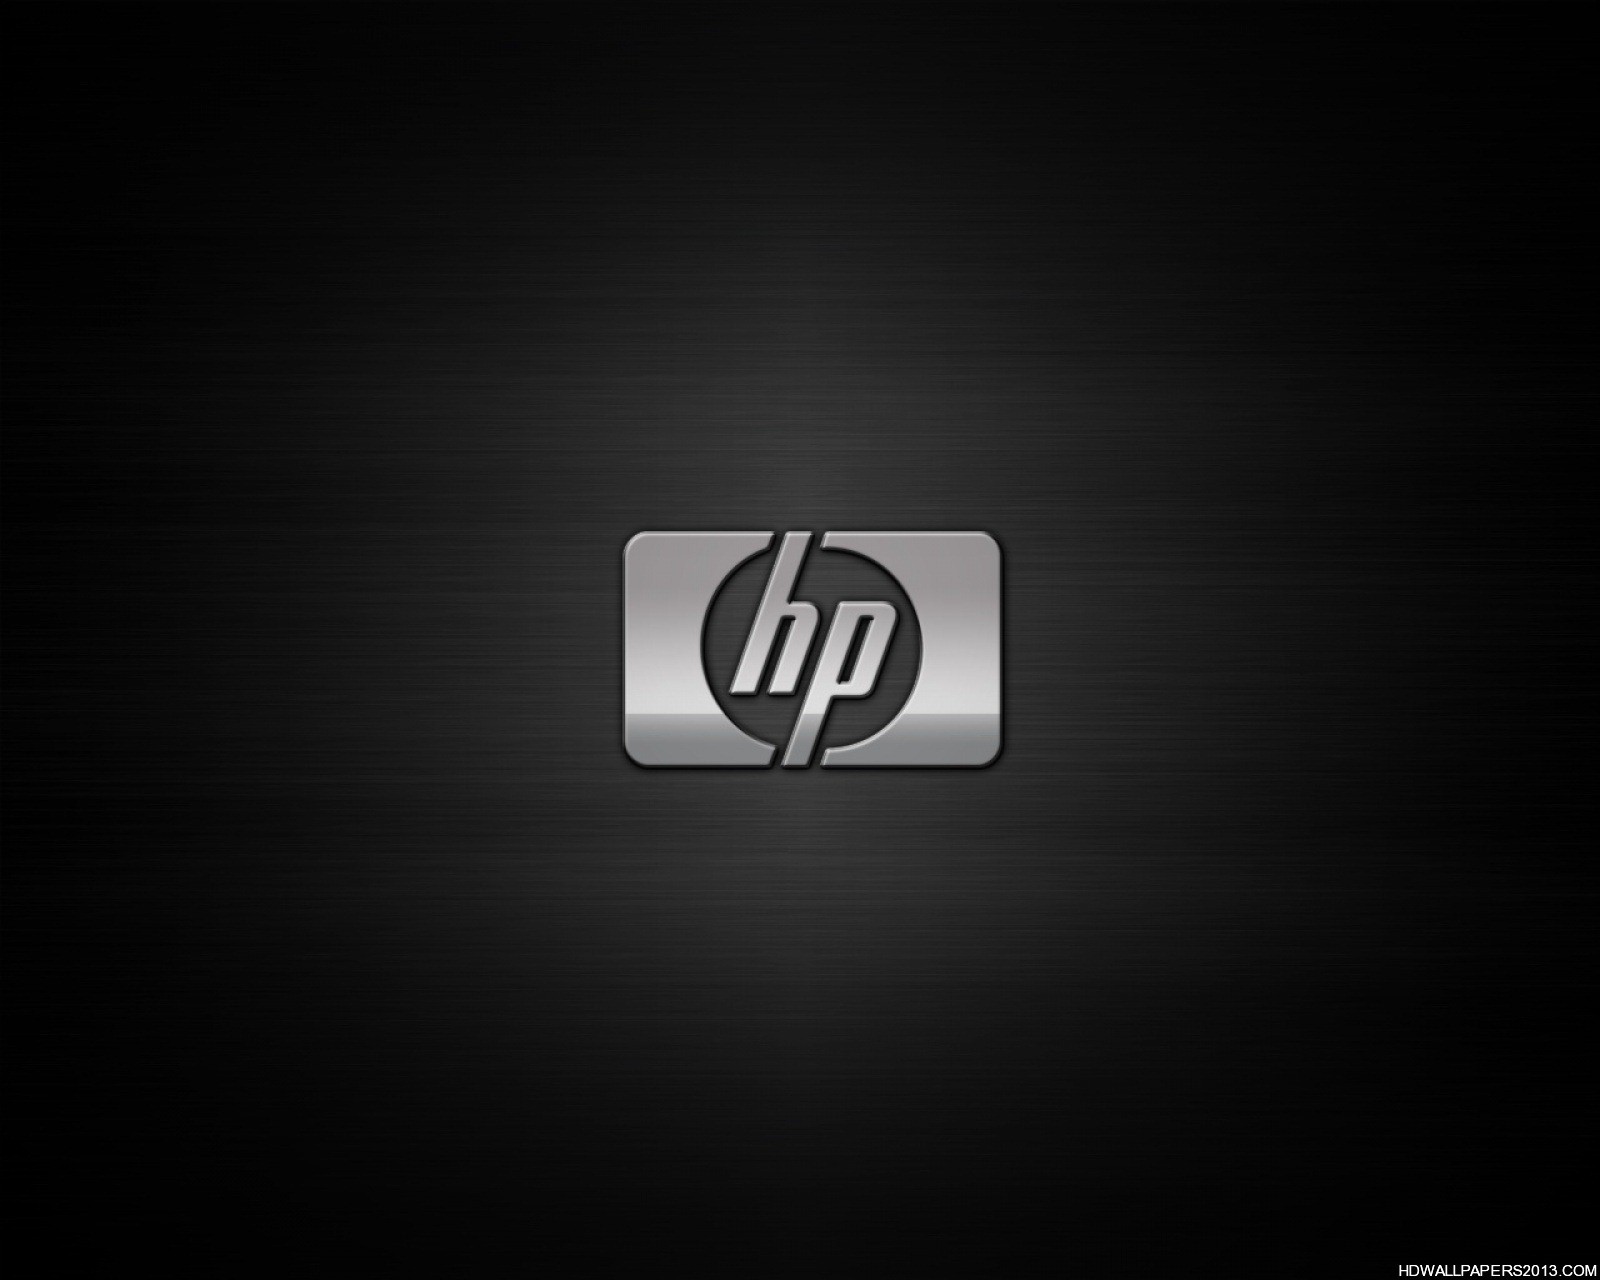 HP Wallpaper High Definition Wallpapers High Definition Backgrounds